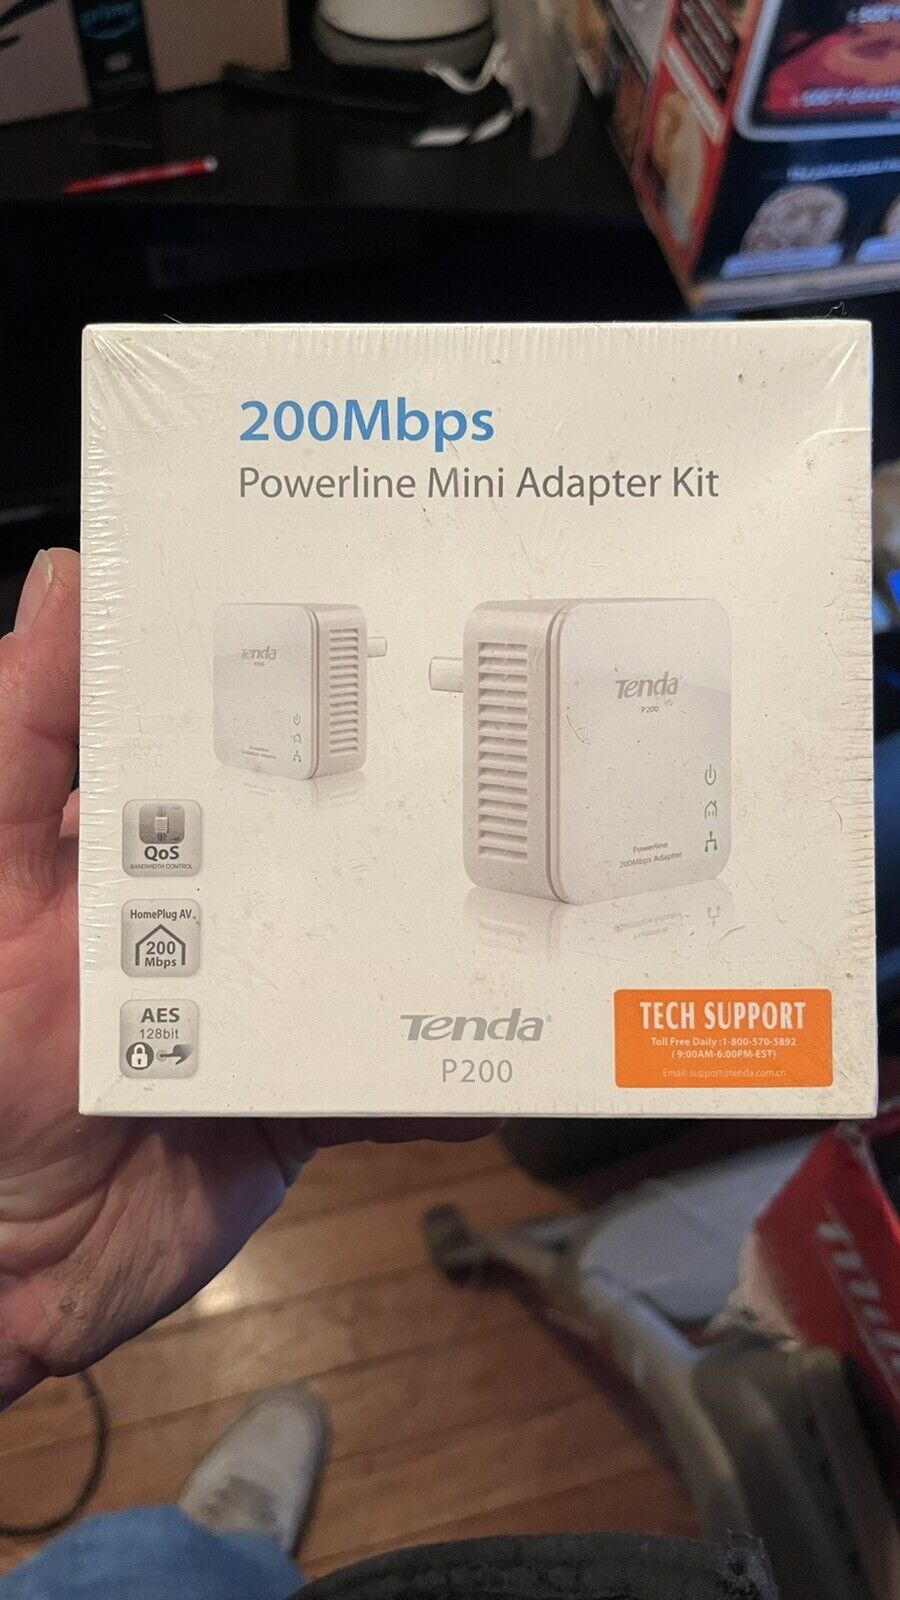 Tenda P200 Powerline Mini Adapters Up to 200Mbps PLC Adapters - New